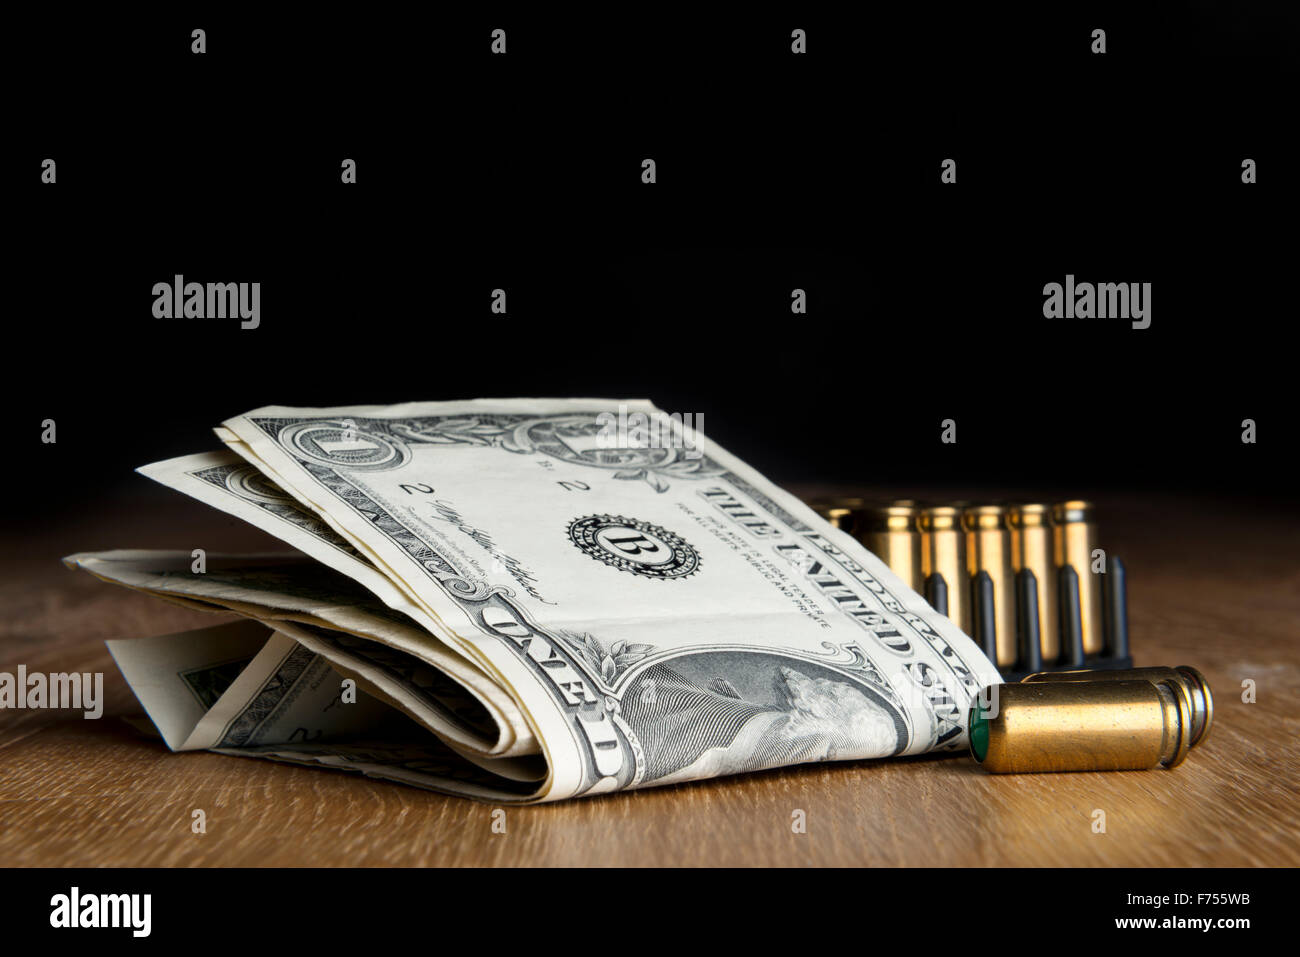 Image of dollar bills with pistols cartridges on a table Stock Photo